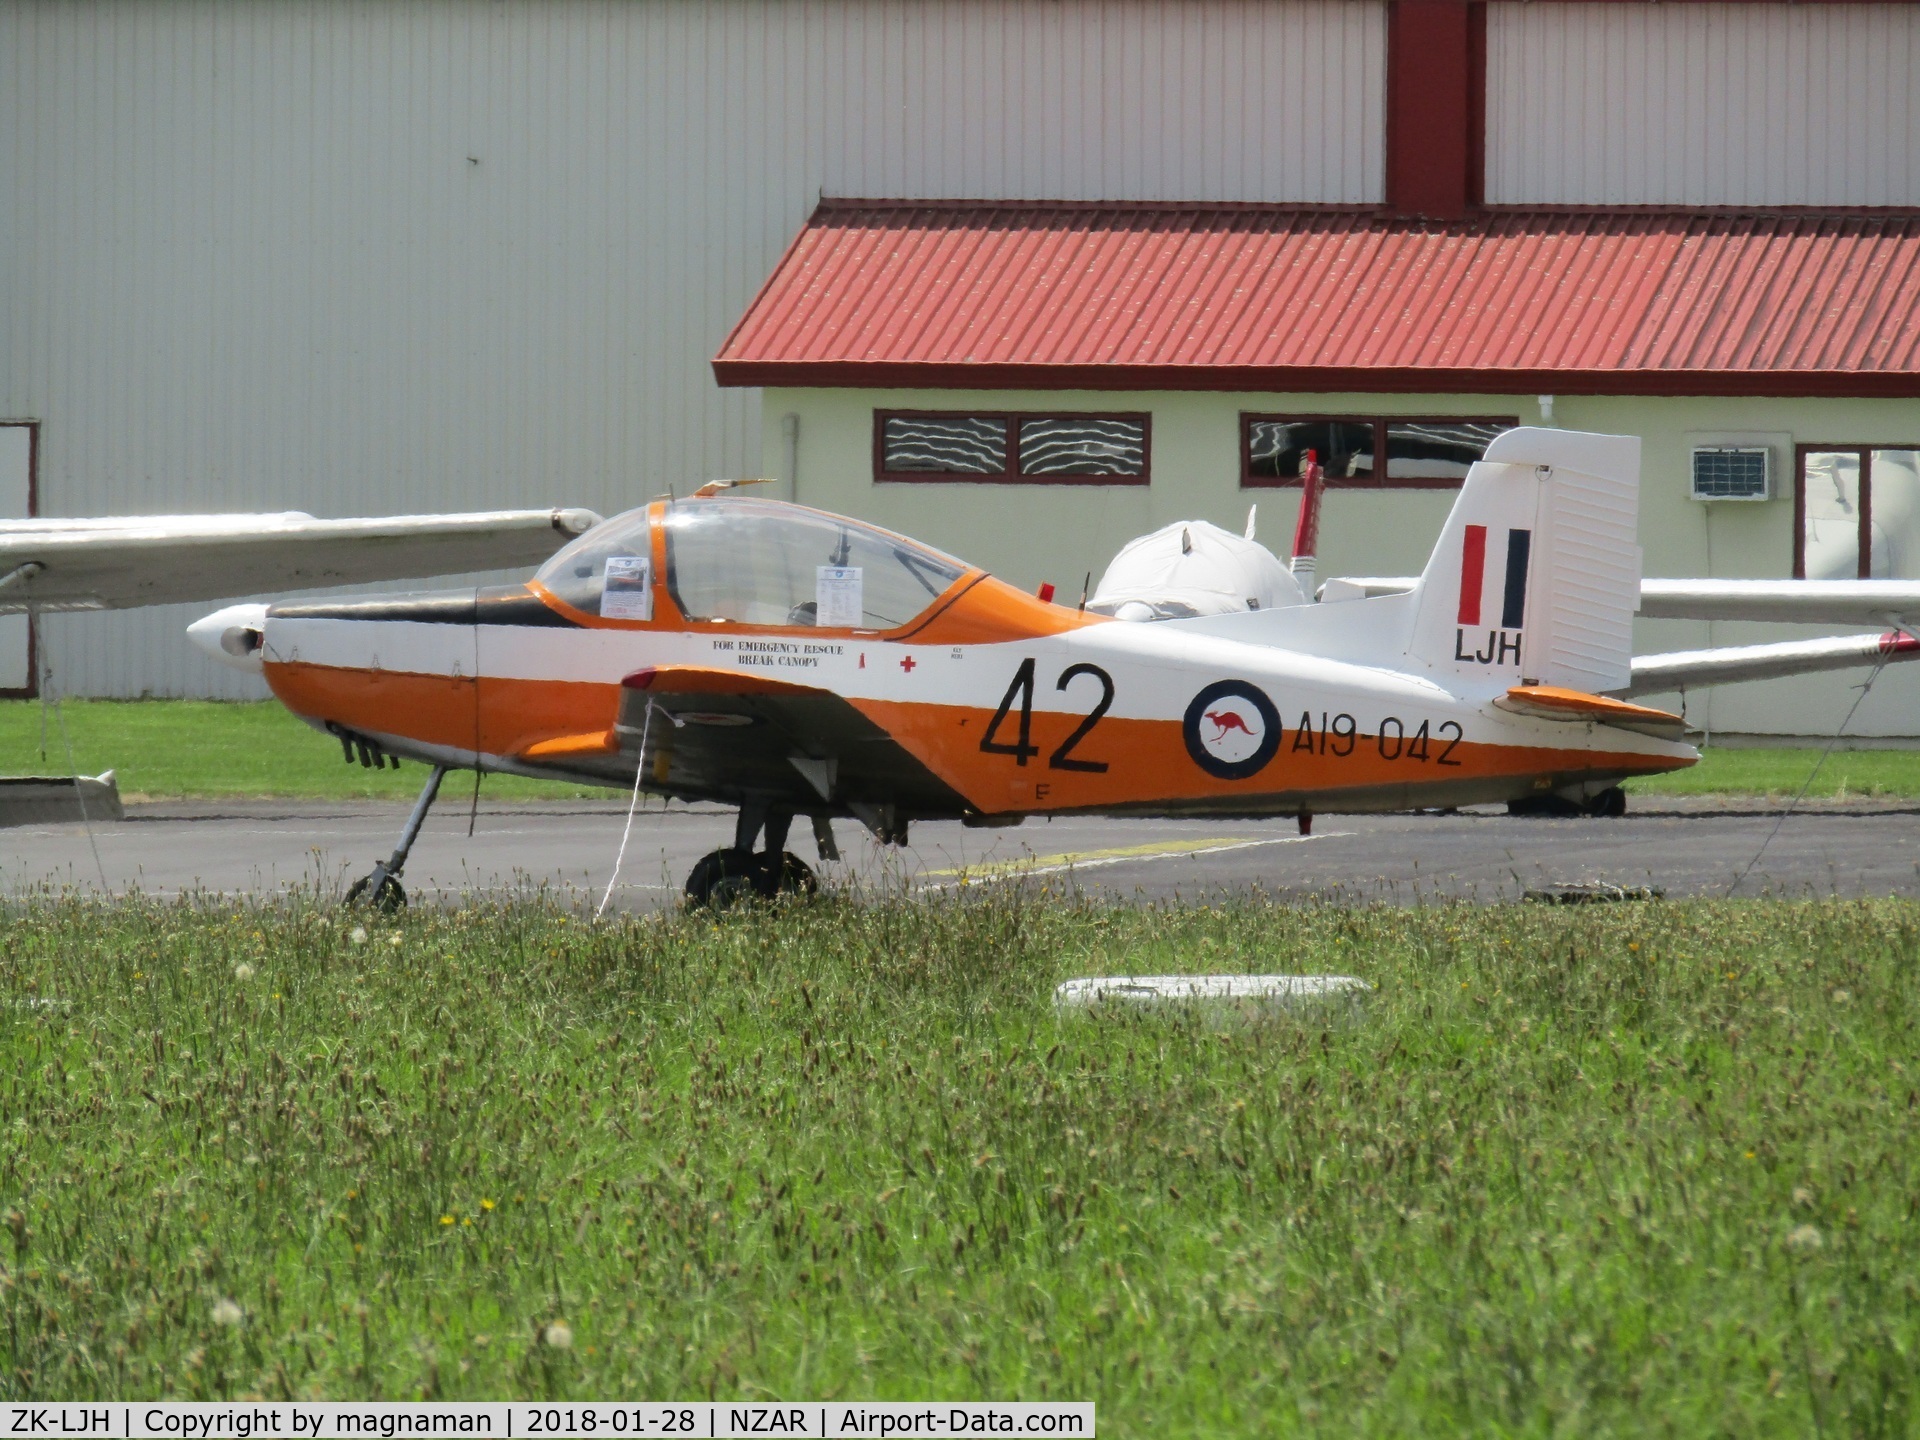 ZK-LJH, New Zealand CT-4A Airtrainer C/N 042, for sale